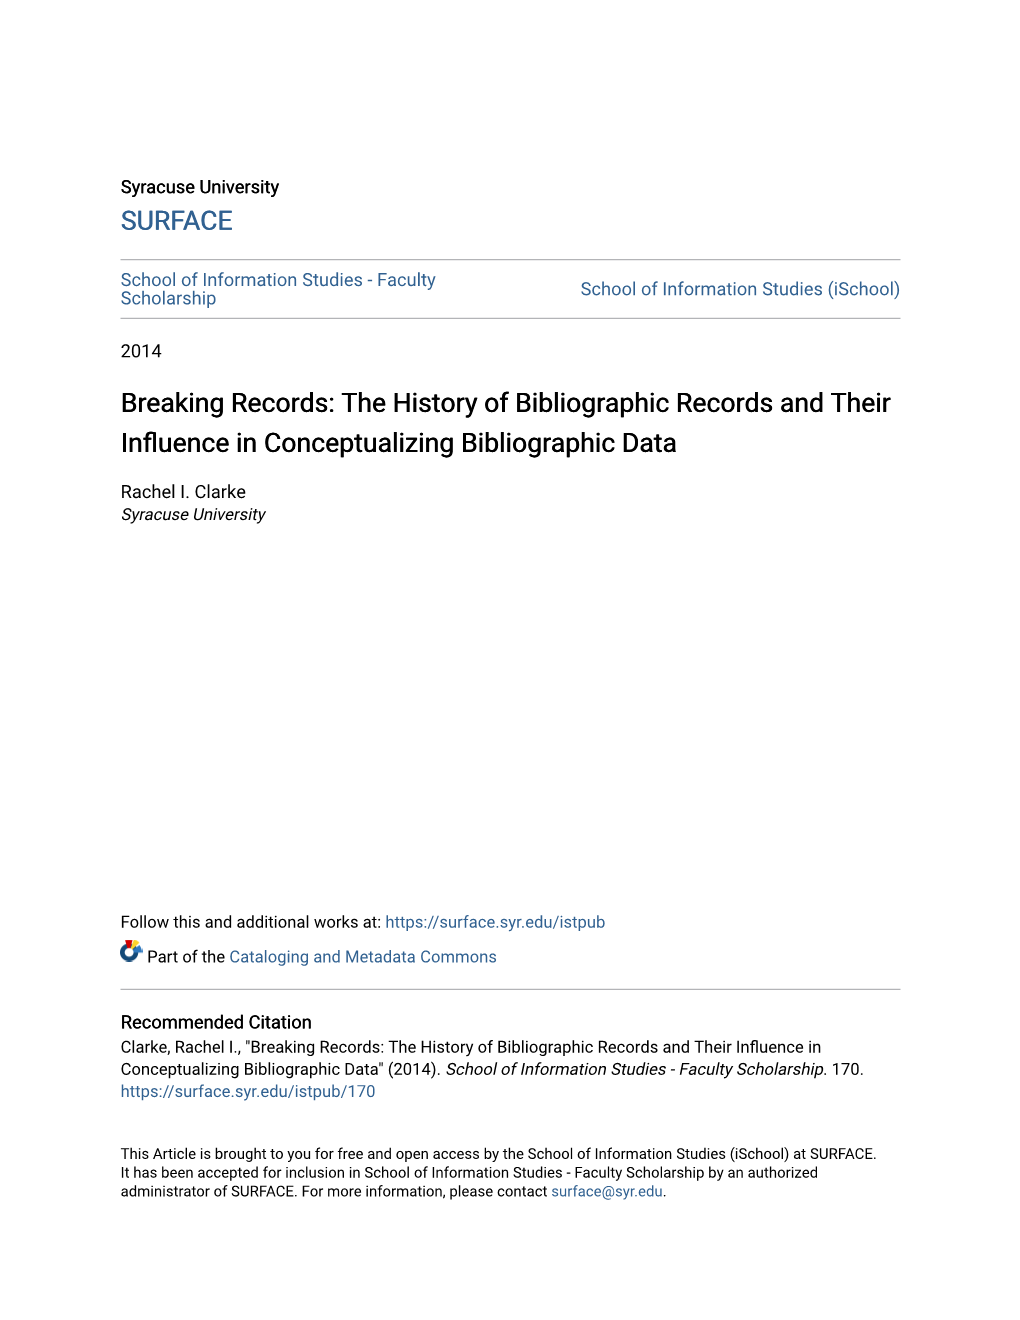 Breaking Records: the History of Bibliographic Records and Their Influence in Conceptualizing Bibliographic Data